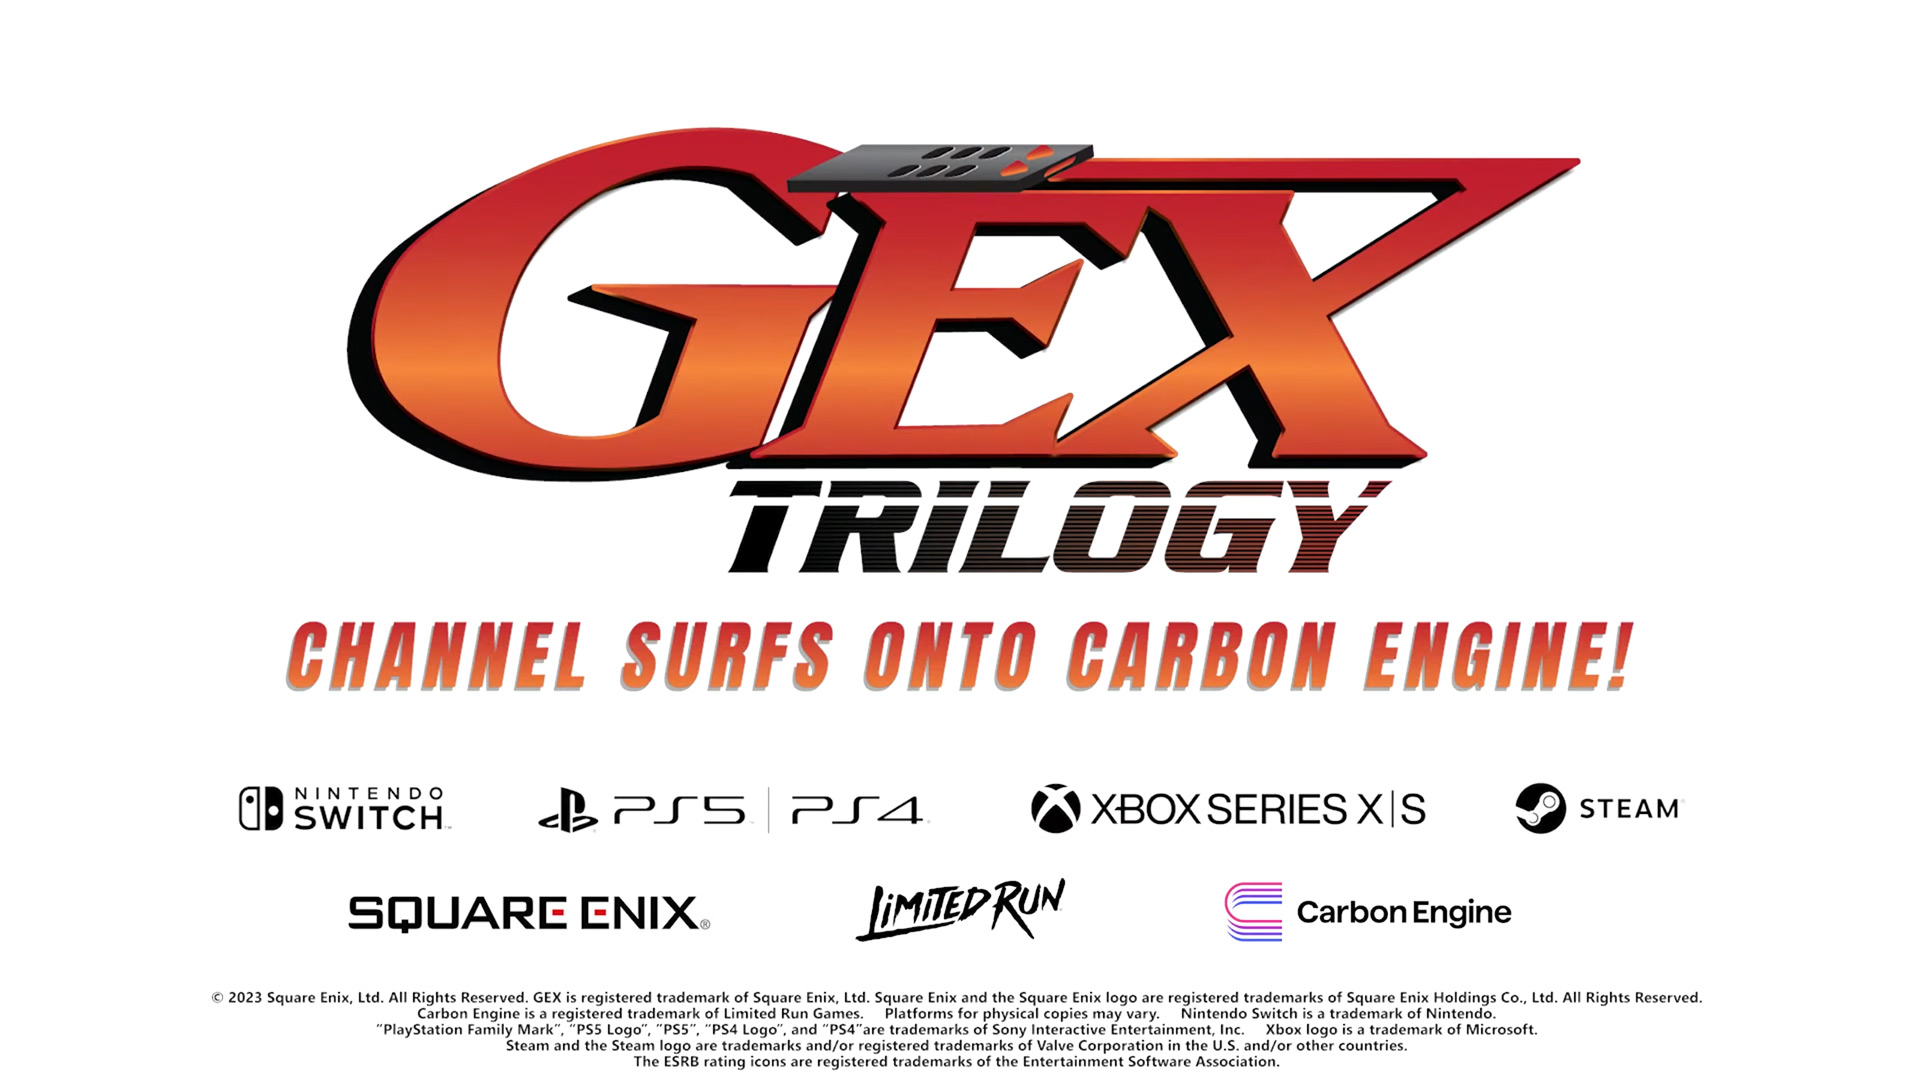 Limited Run Games has announced Gex Trilogy